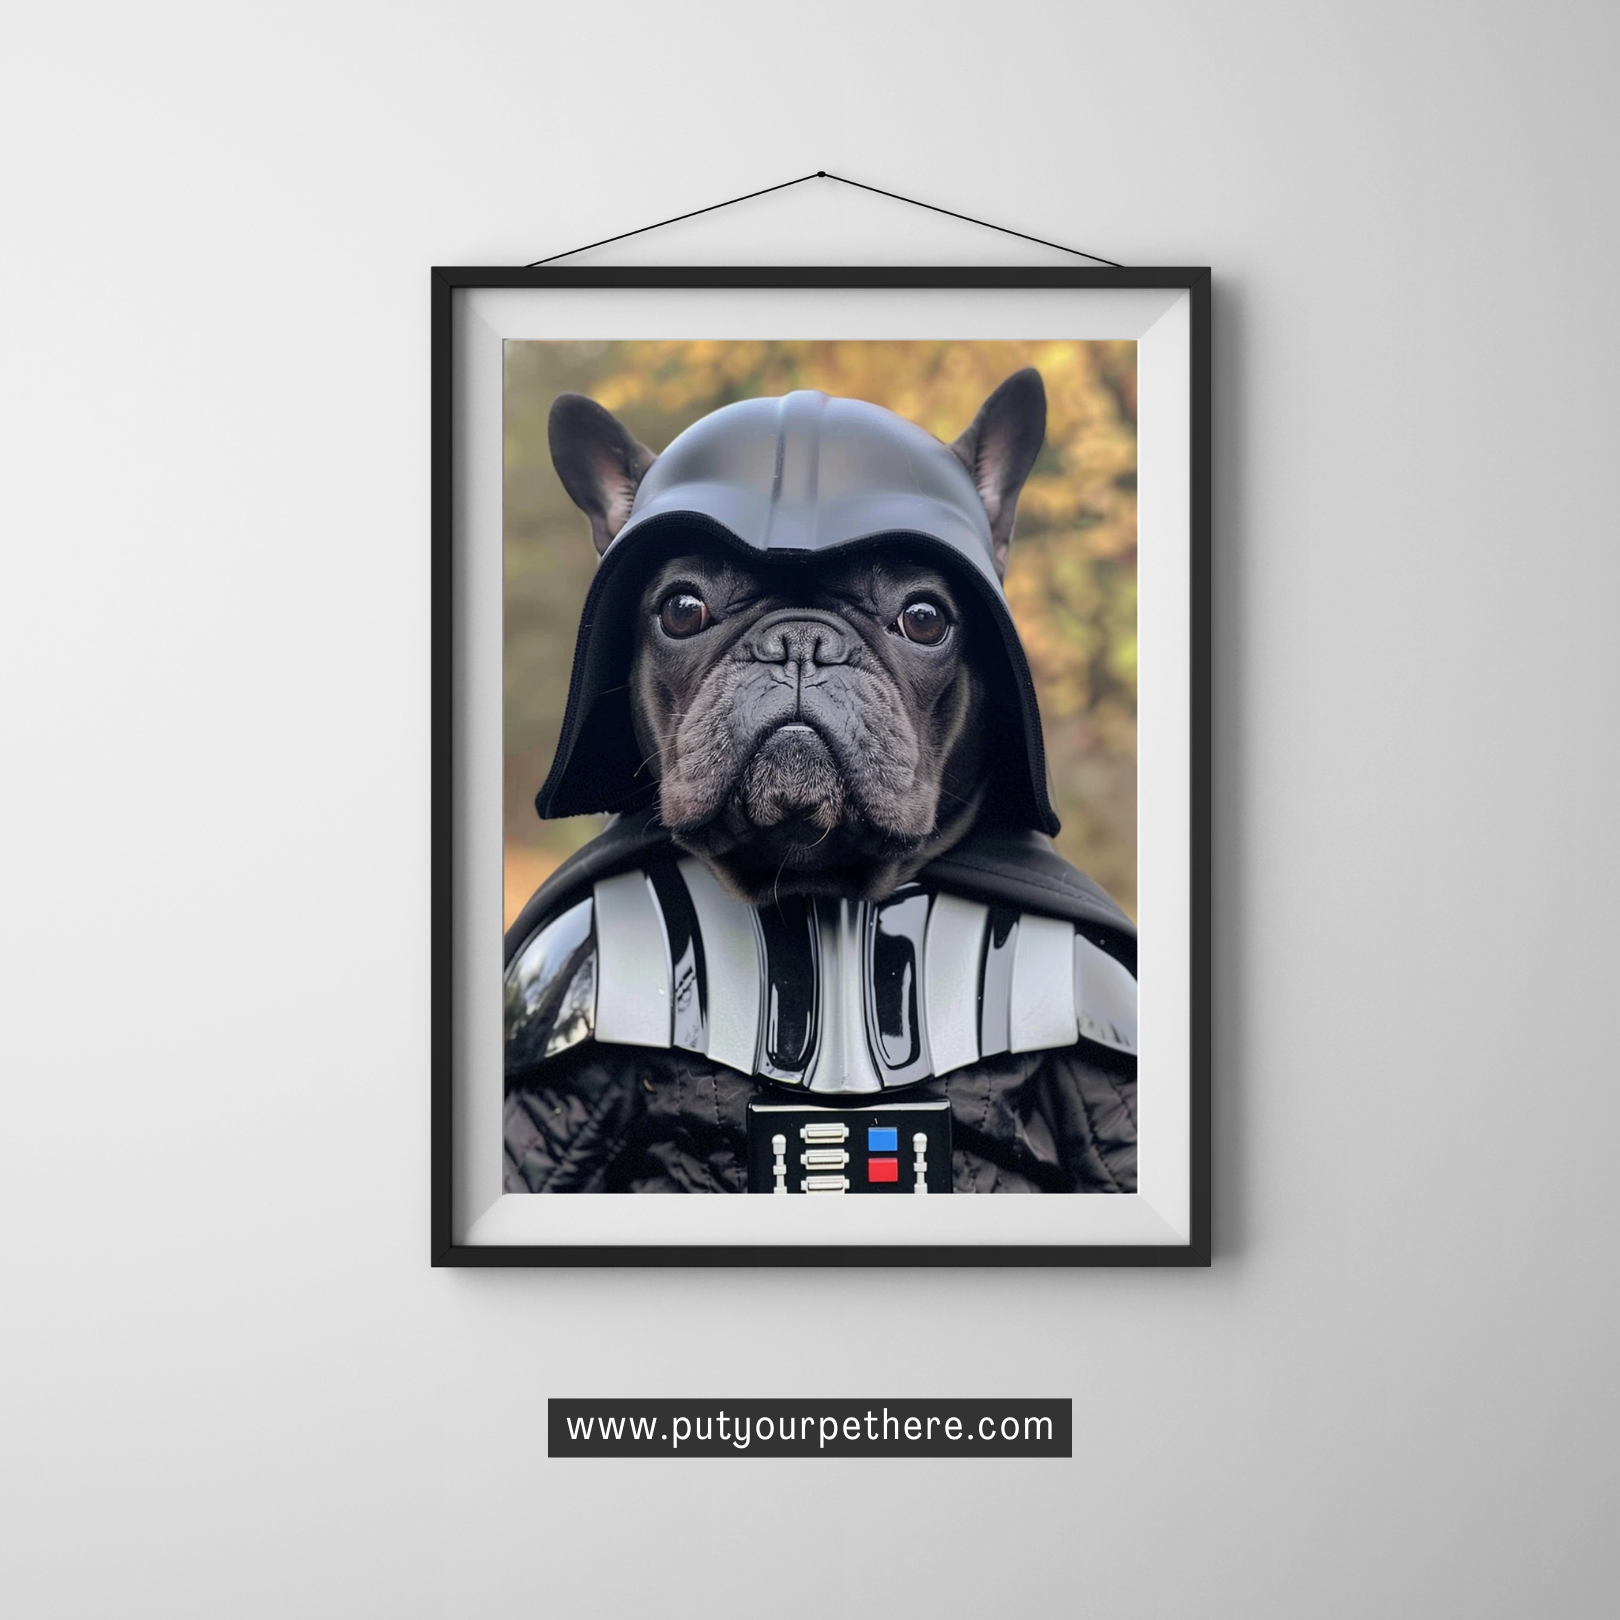 A digital portrait of a French Bulldog from Star Wars movie as Darth Wader, portraying a character from a popular space saga, complete with a detailed helmet and suit, available at putyourpethere.com.